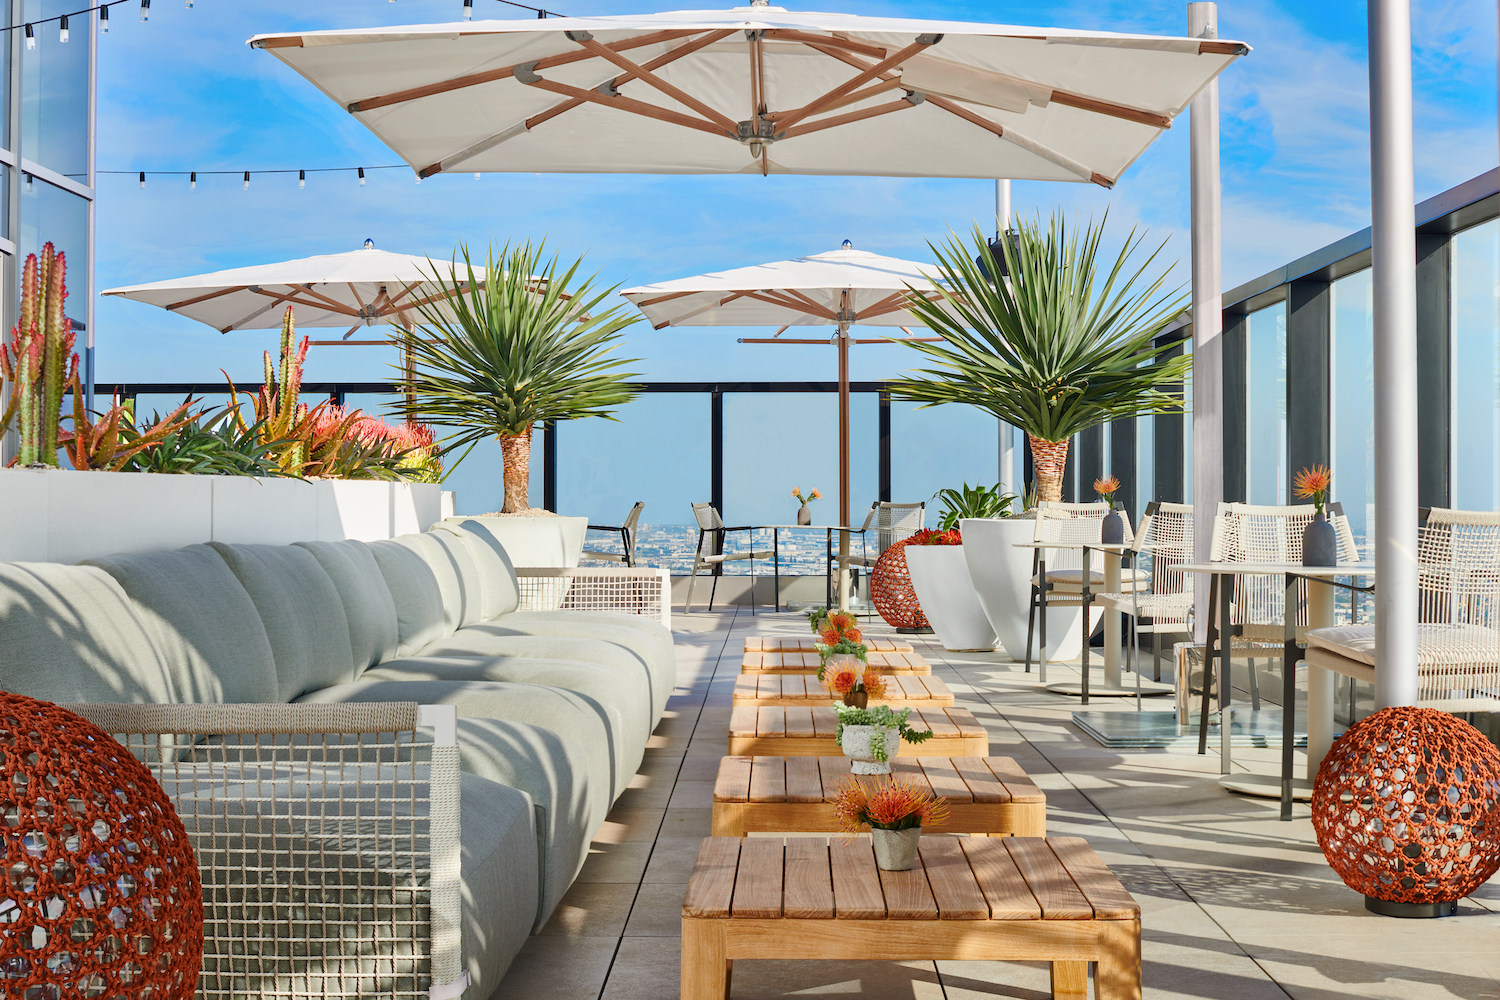 Rooftop bar area with big couches and umbrellas.